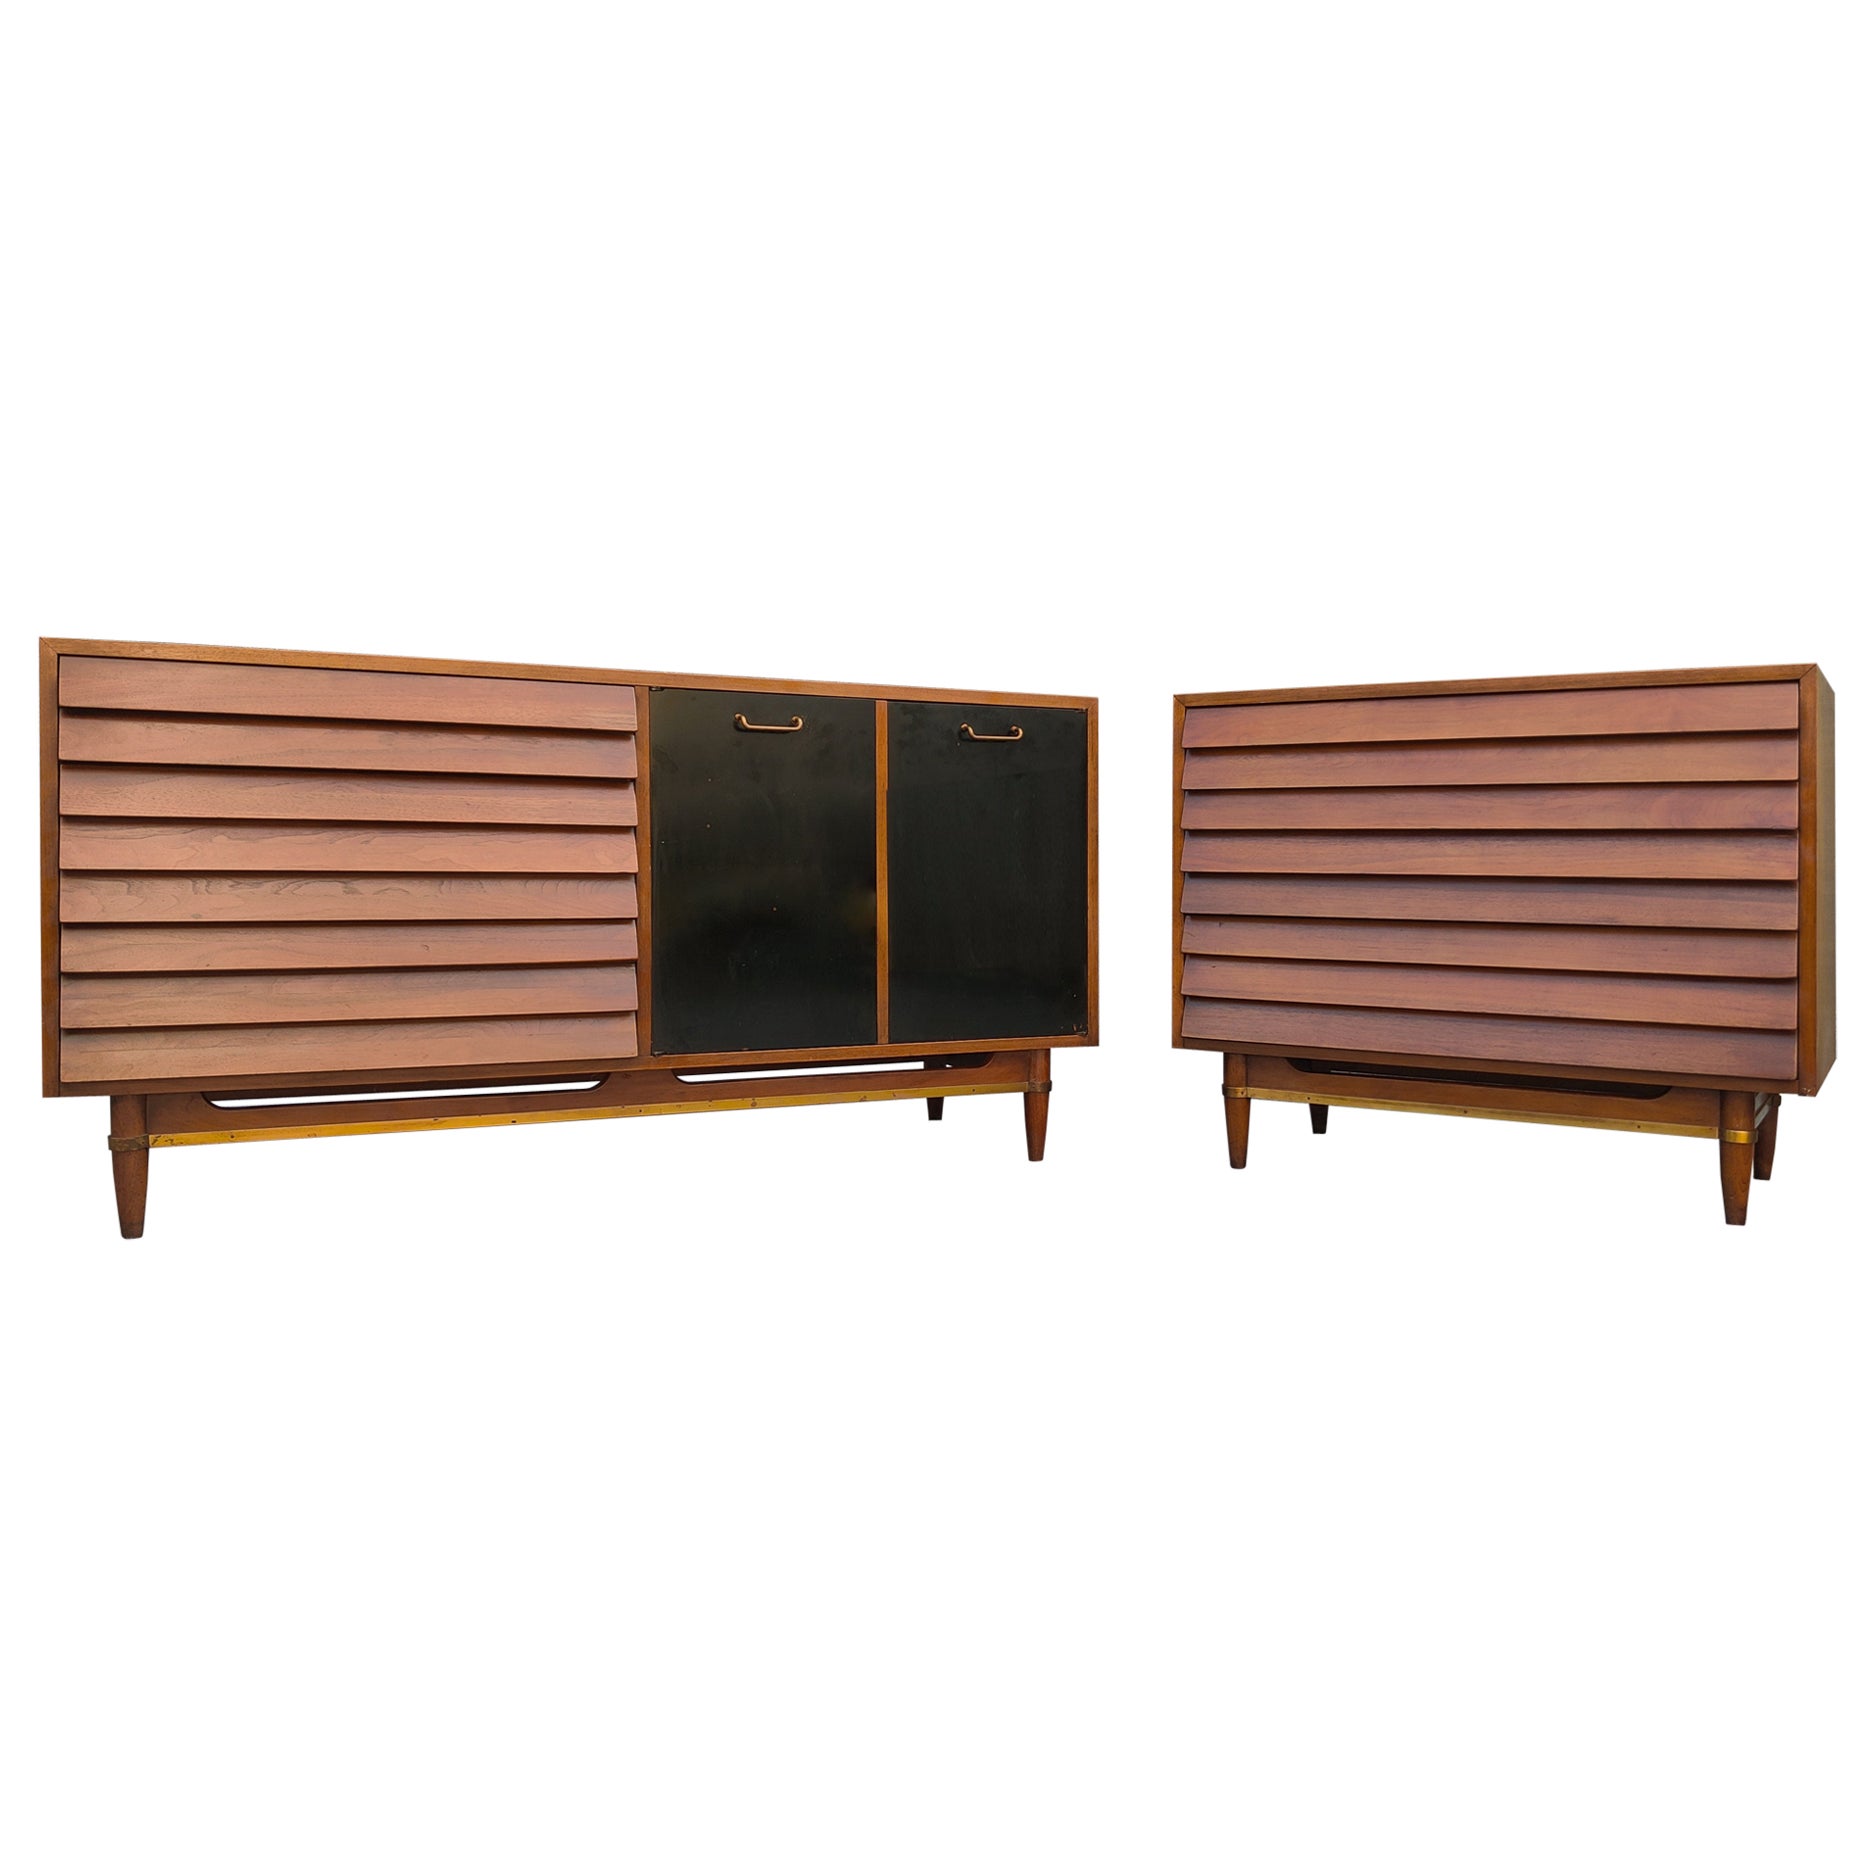 Merton Gershun - American of Martinsville Long & Short Louvered Walnut Cabinets For Sale